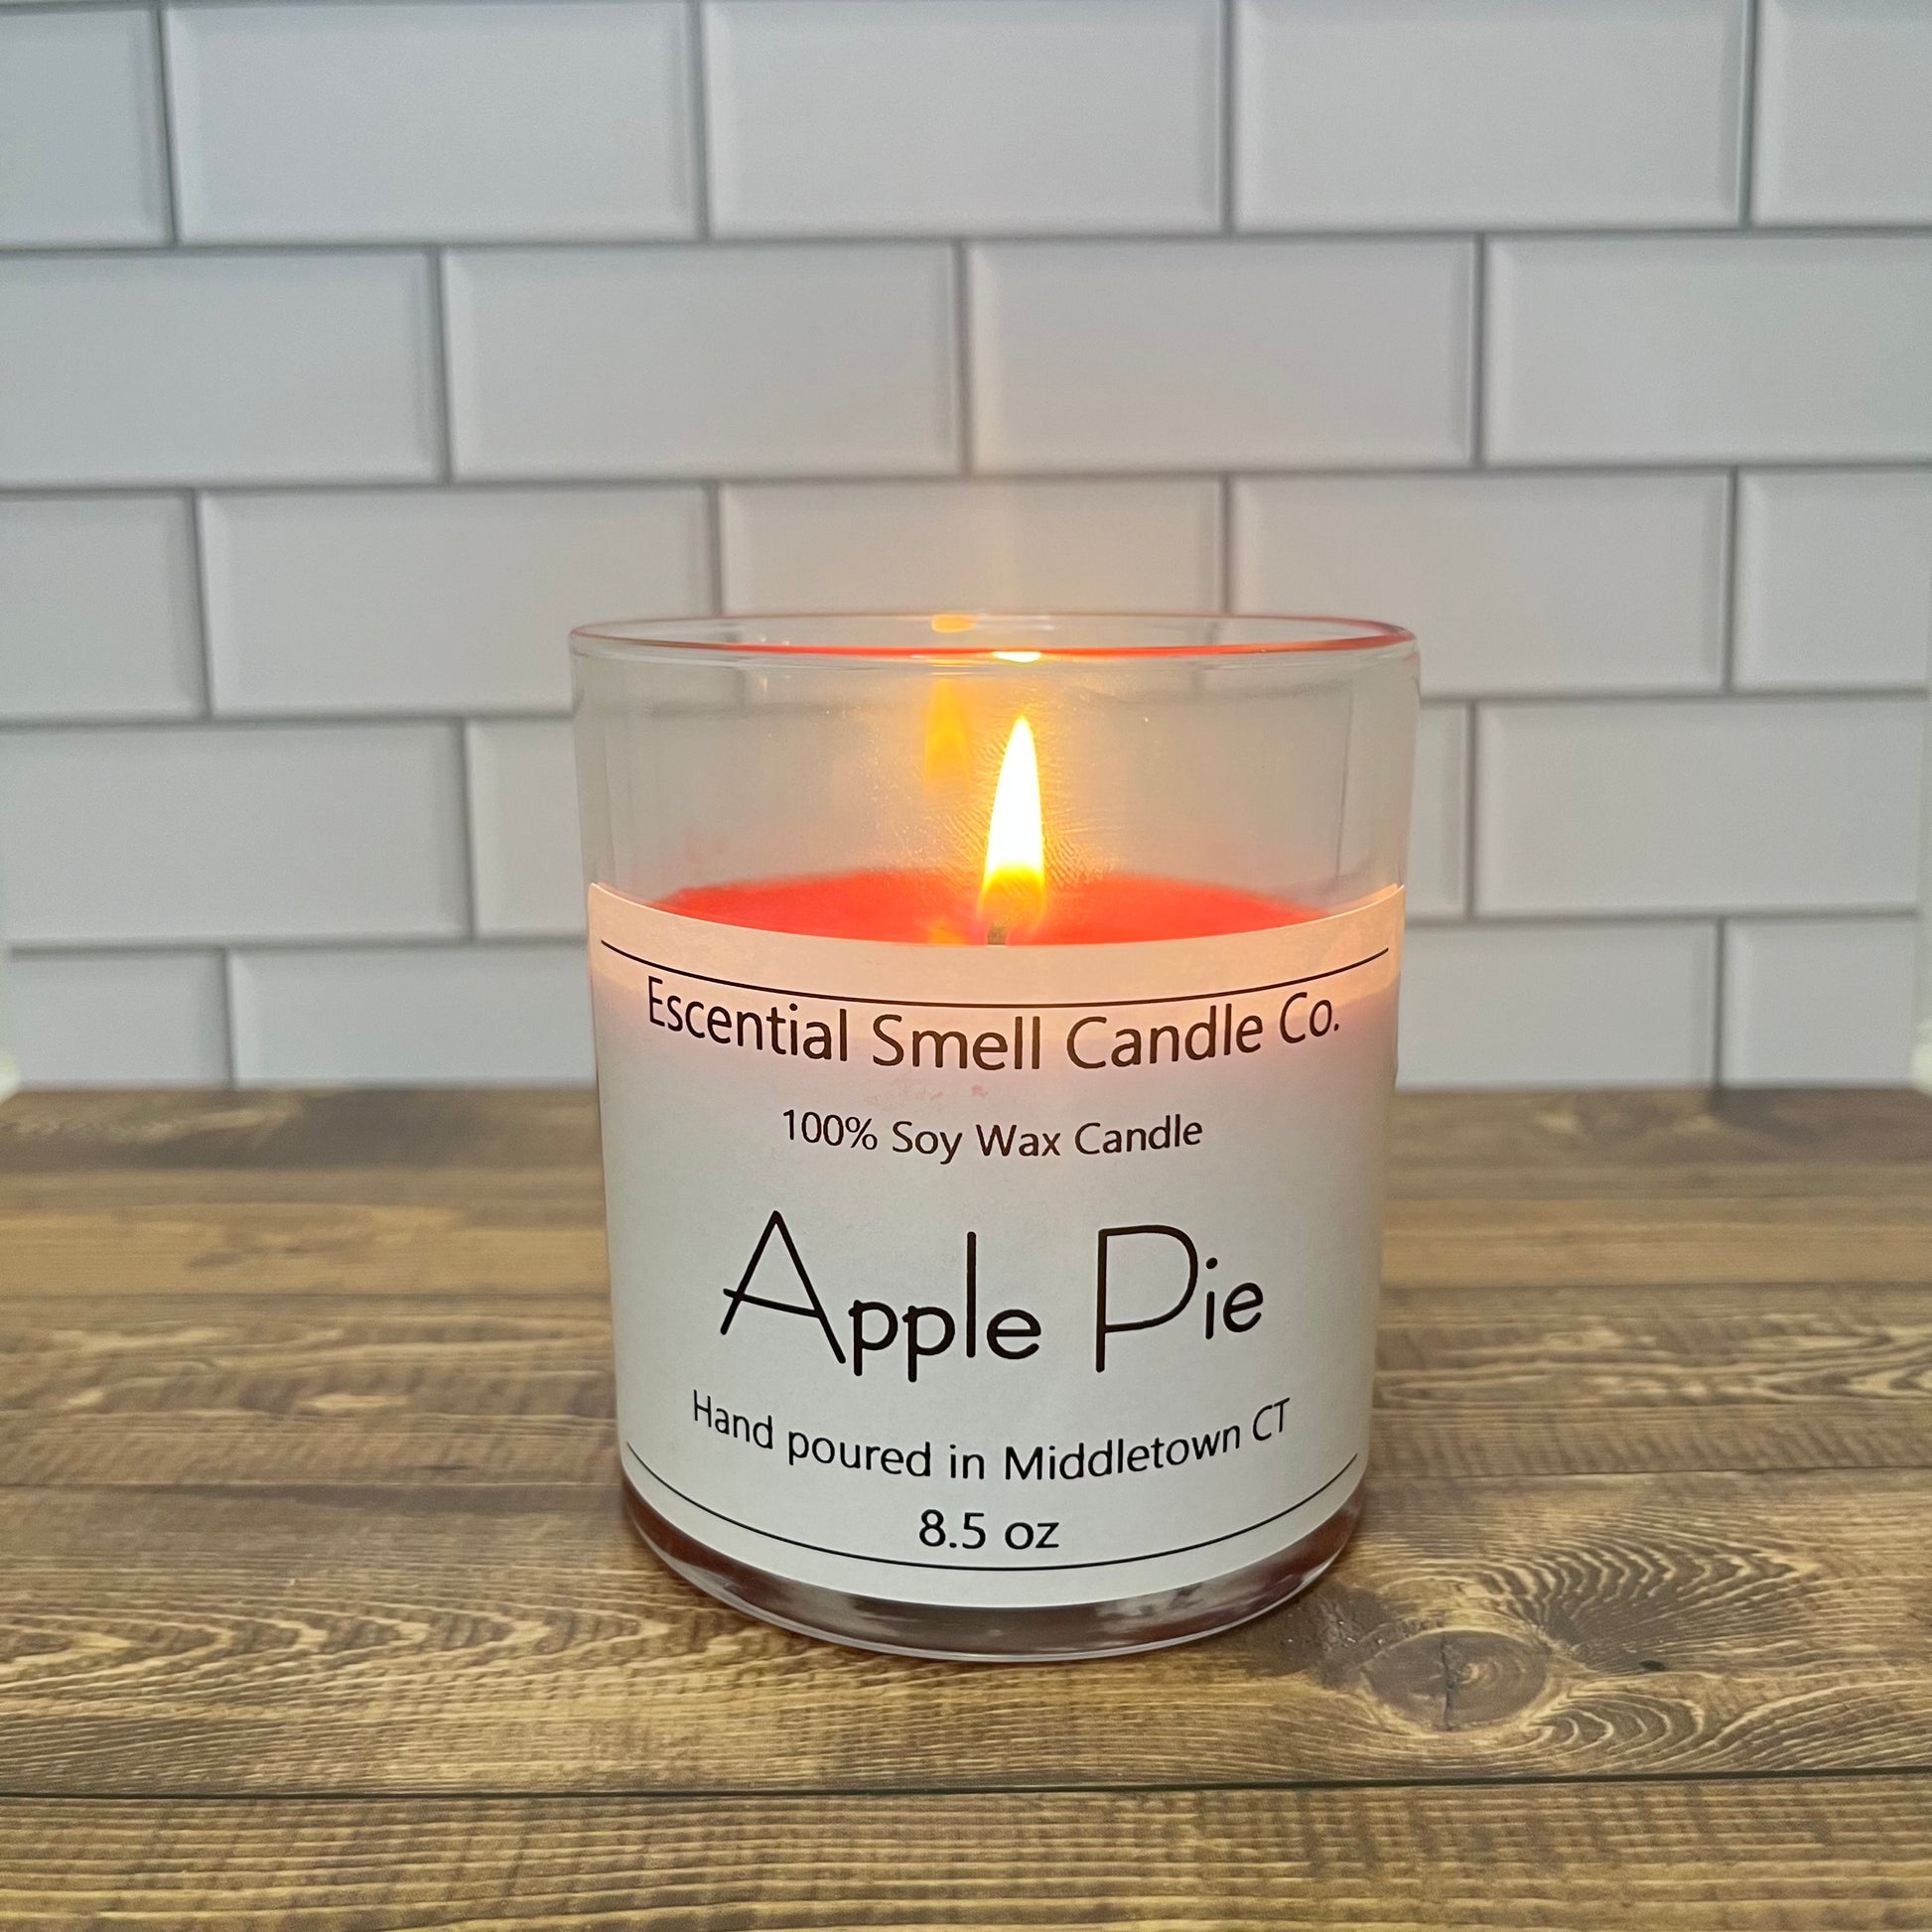 Apple Pie is one of the Autumn scents that you didn’t know you needed but you can’t live without! This Apple Pie Scented Autumn Candle has top notes of cinnamon and nutmeg with middle notes of apple and vanilla. This candle will be sure to fill your house with the scent of Apple Pie and give you the Autumn vibes you need!